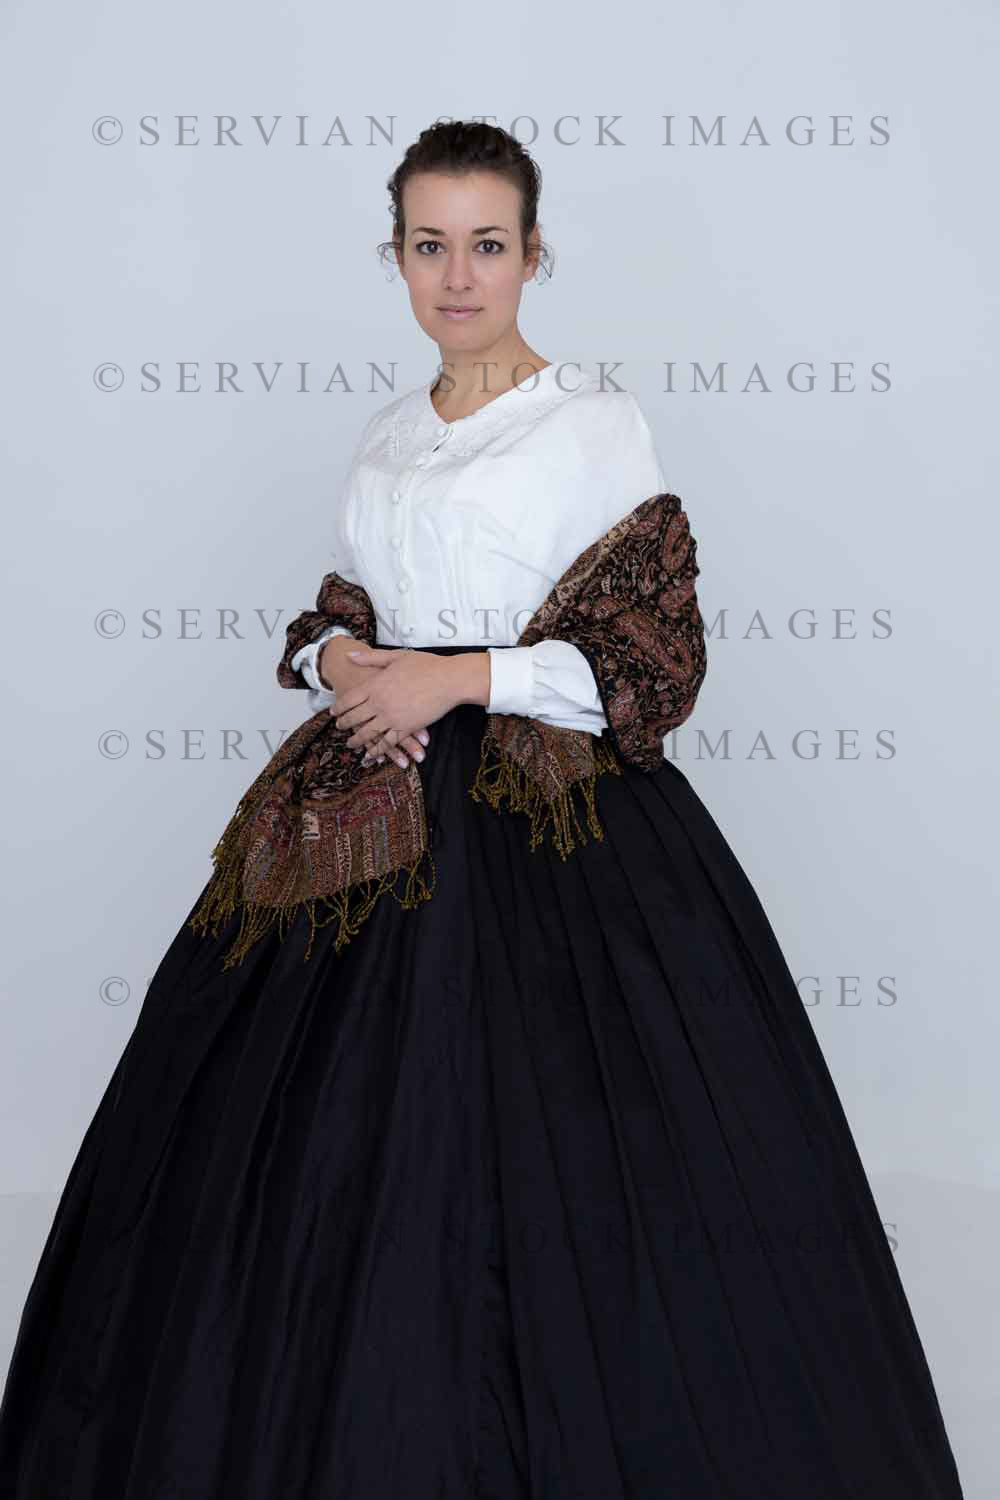 Victorian woman wearing a Garibaldi blouse, paisley shawl, and full skirt against a white backdrop (Emma 2343)